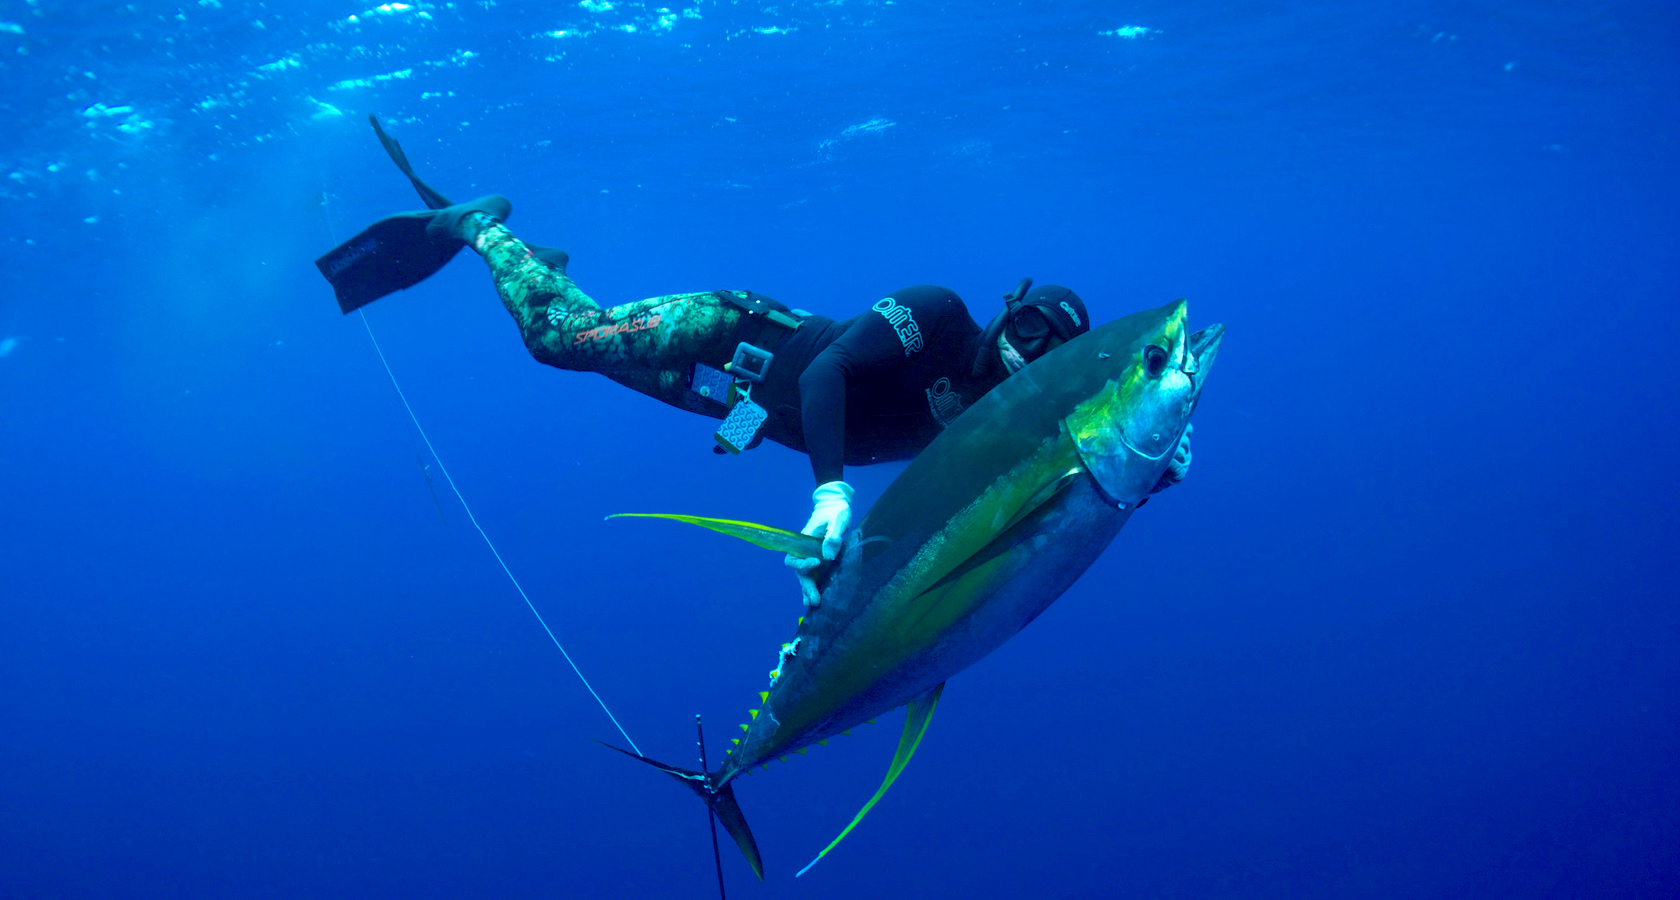 How to arrange the best sea spearfishing adventure